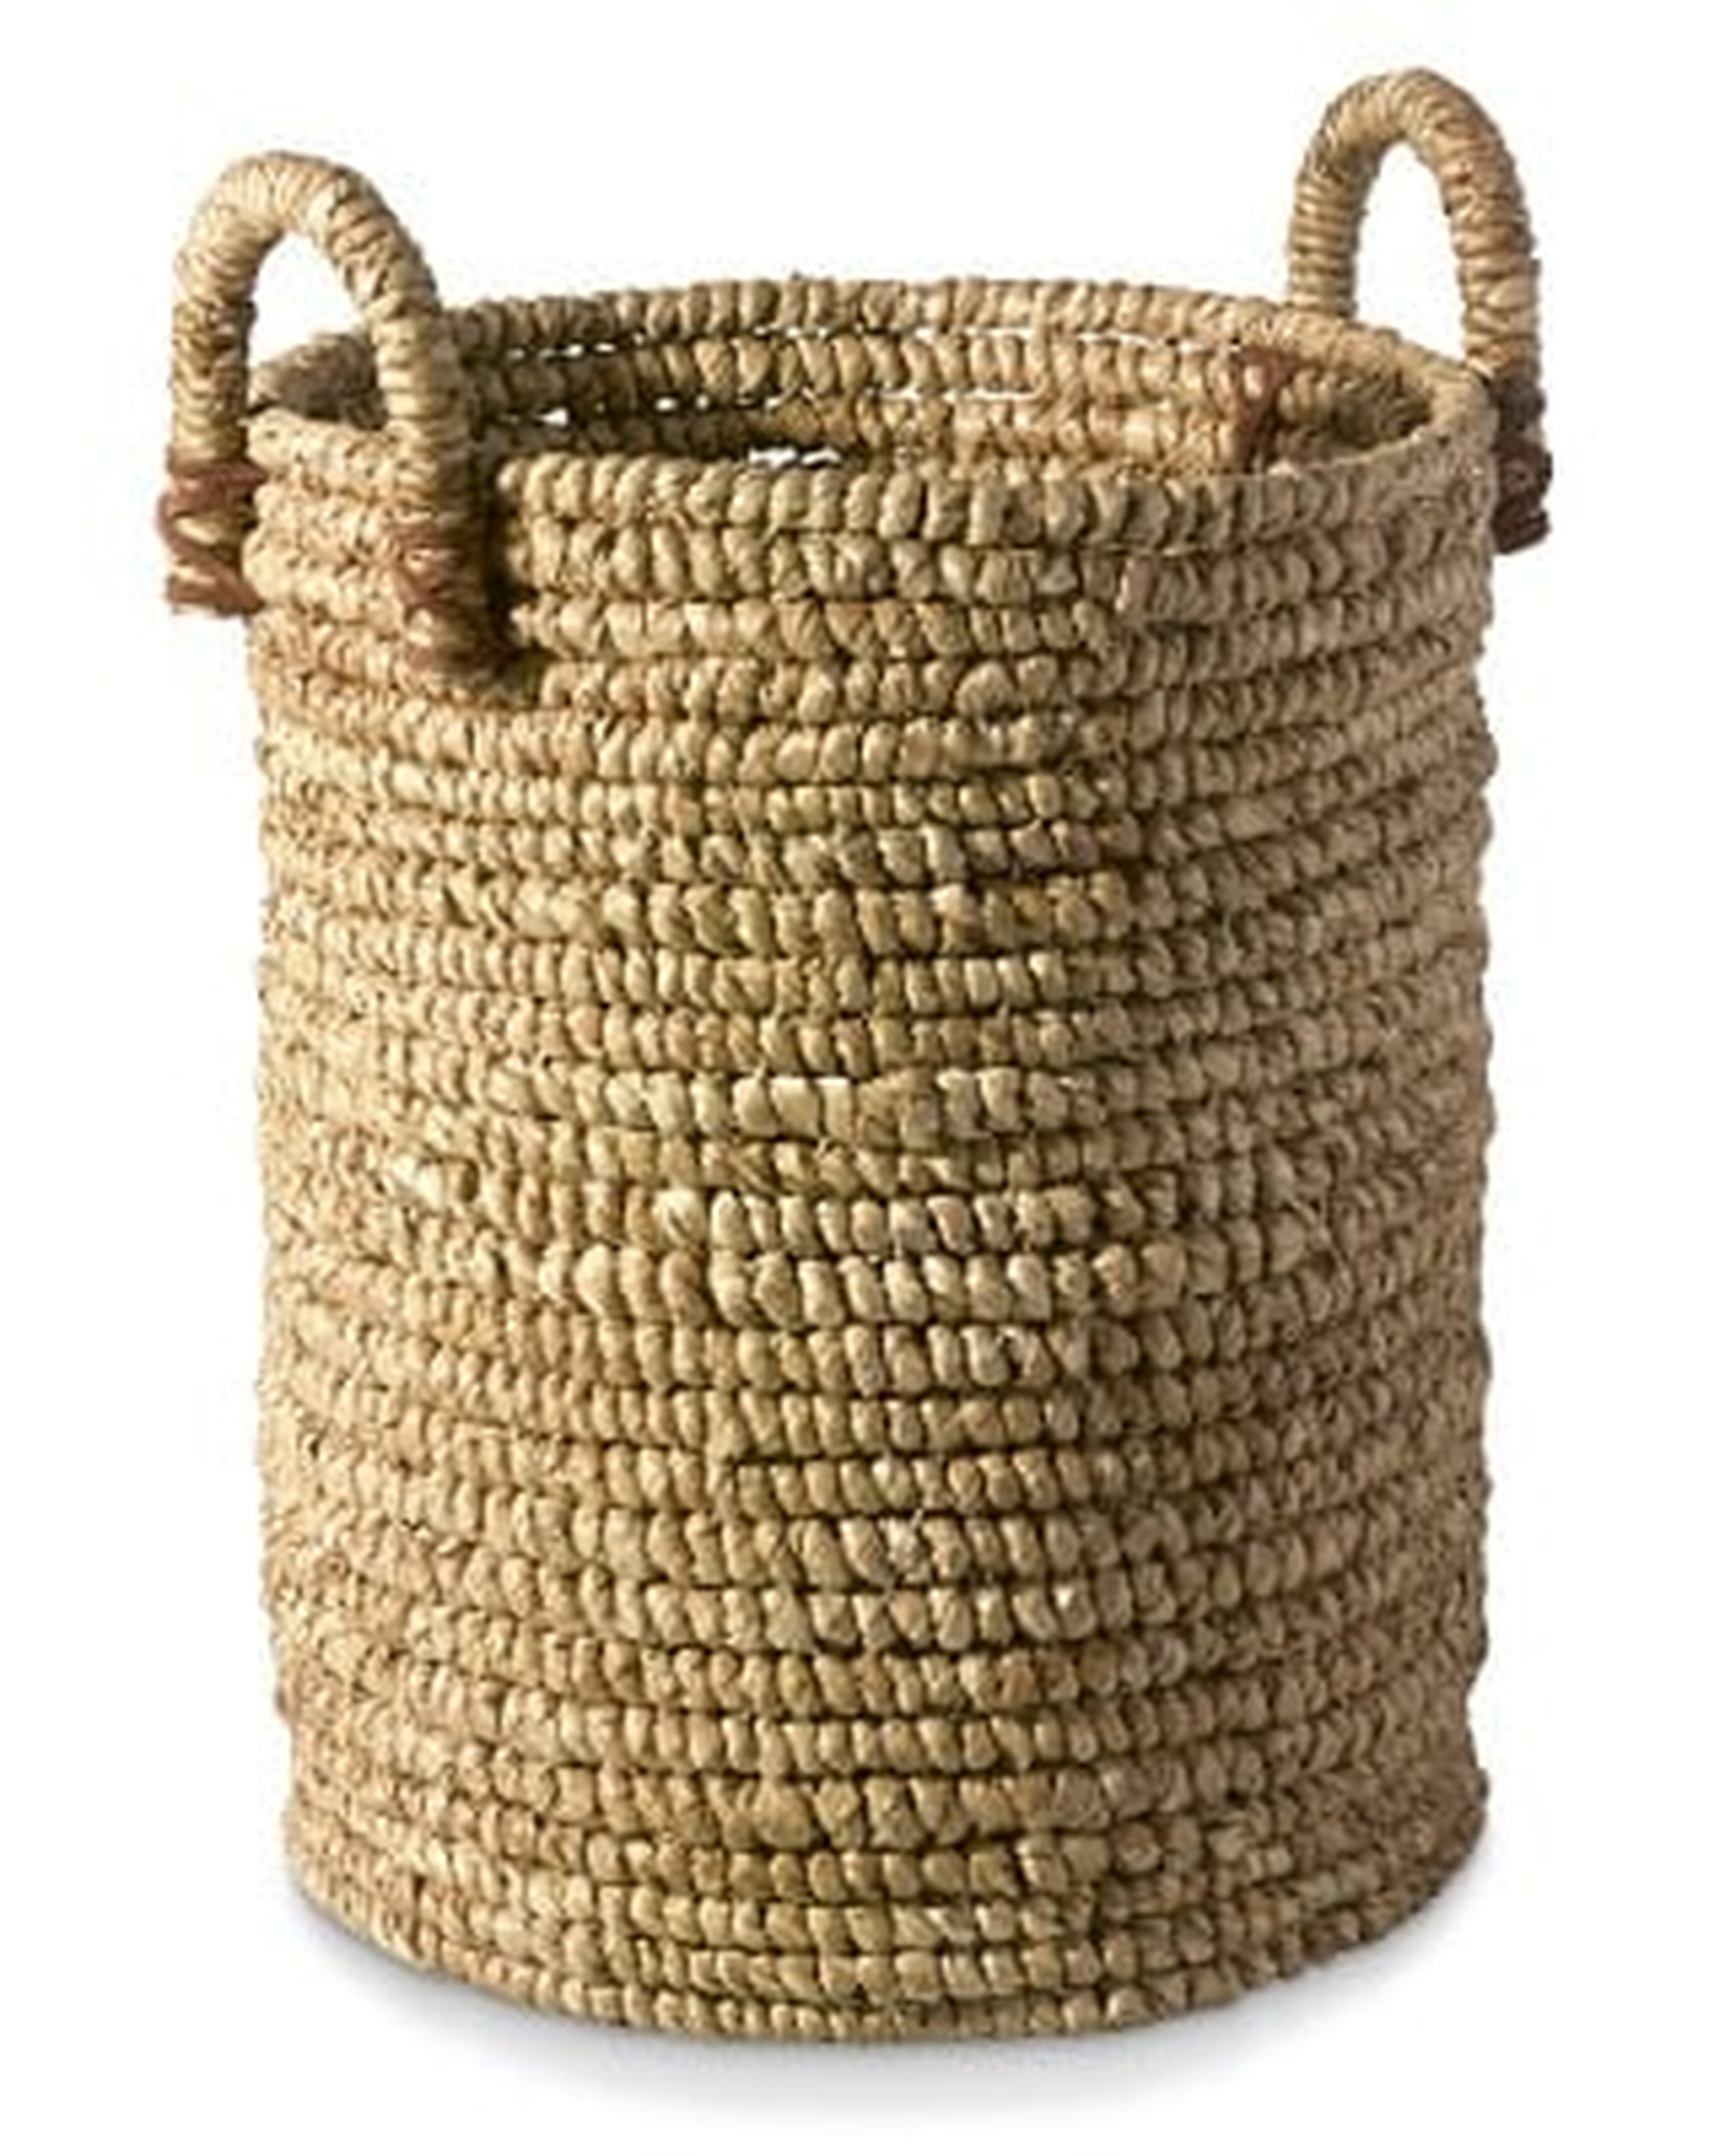 Woven Seagrass Basket with Leather, Large - Williams Sonoma